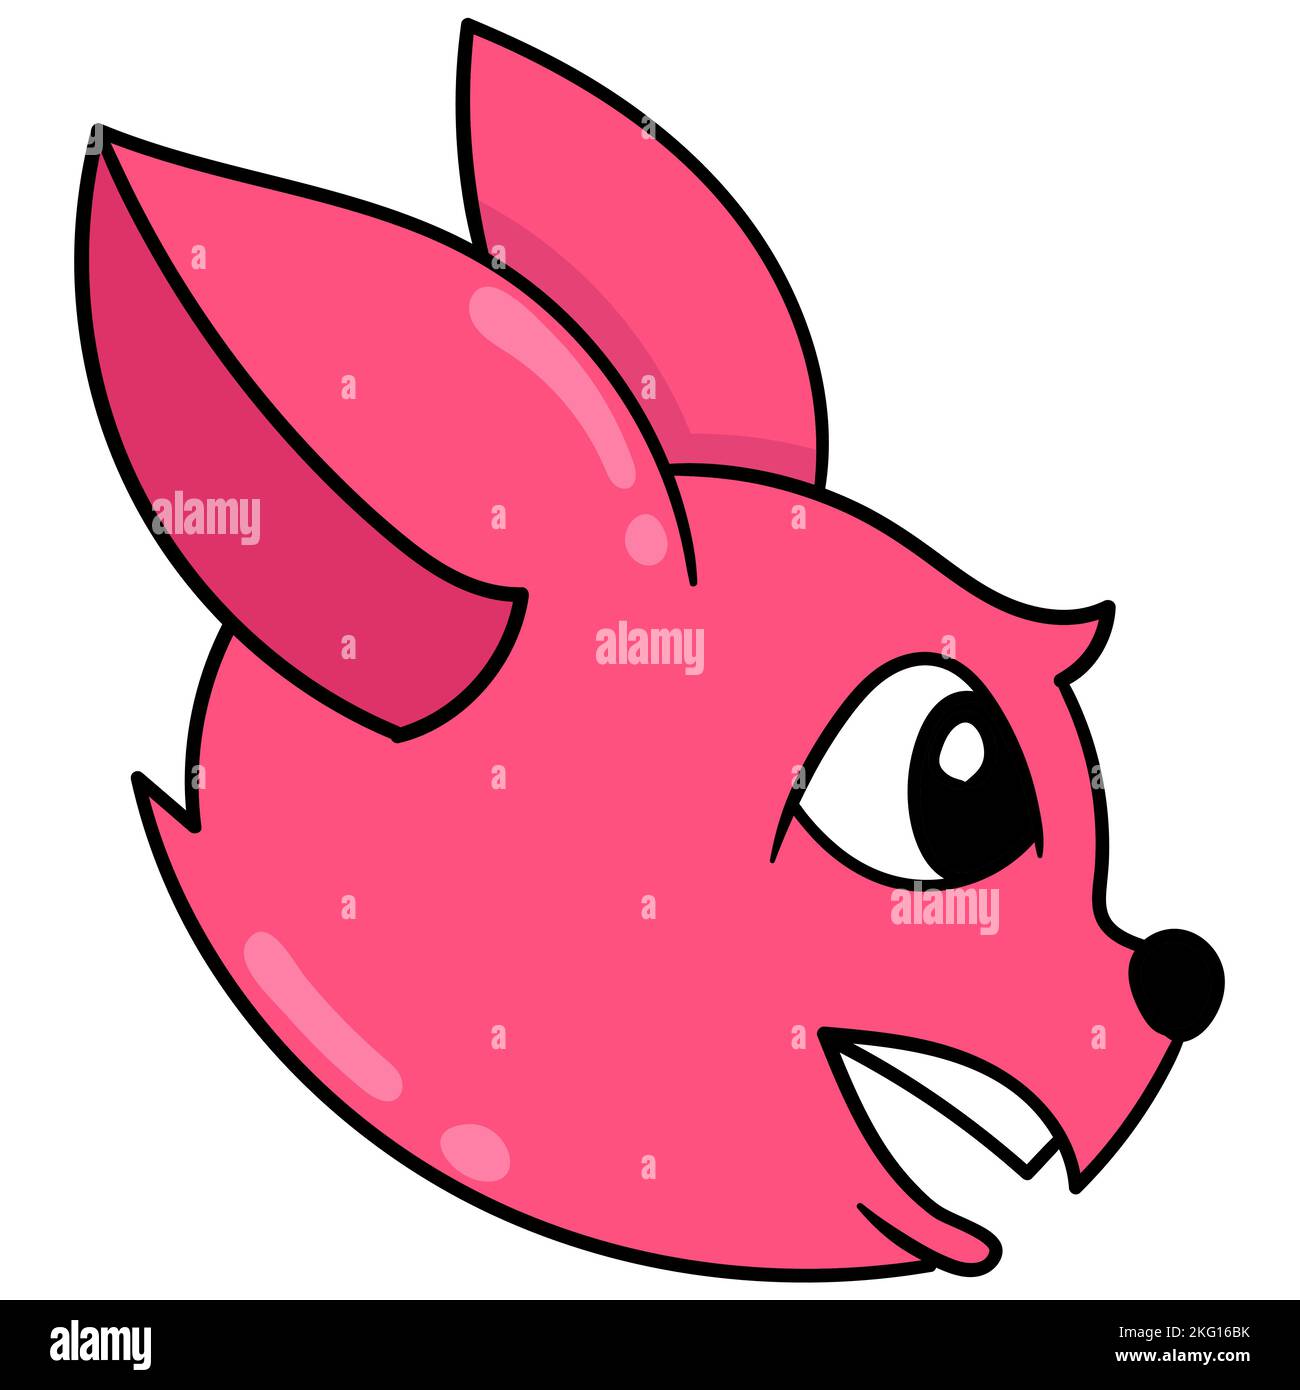 The pink faced weasel head smiling from the side, doodle icon Stock Vector